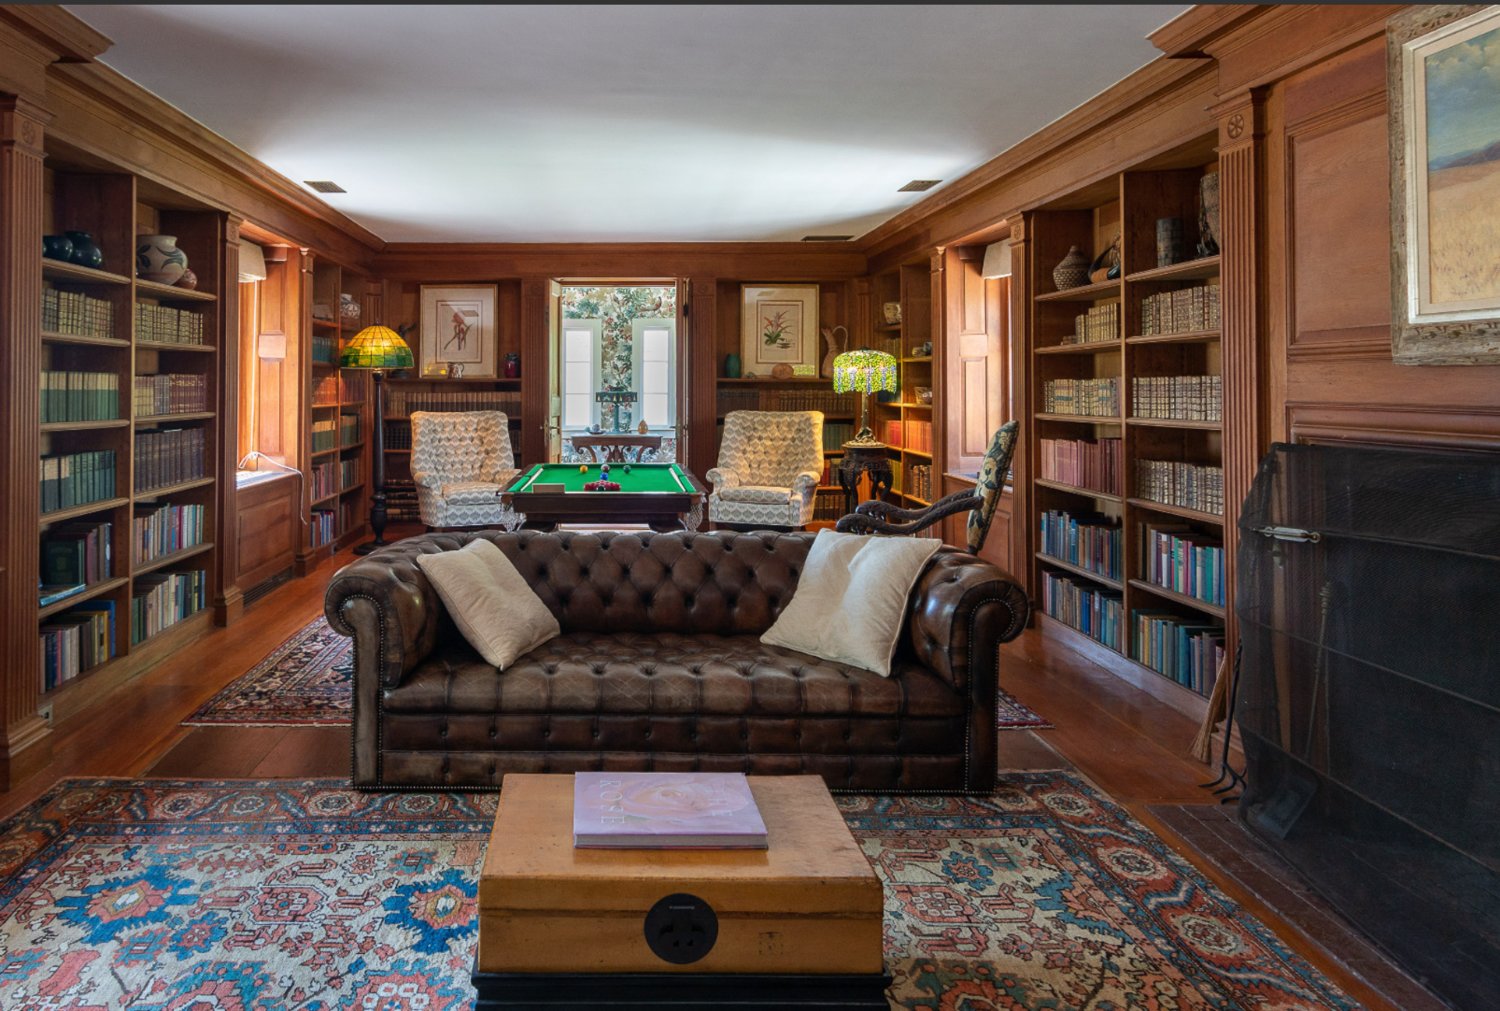 The second-floor library and game room has a fireplace and built-in shelving.